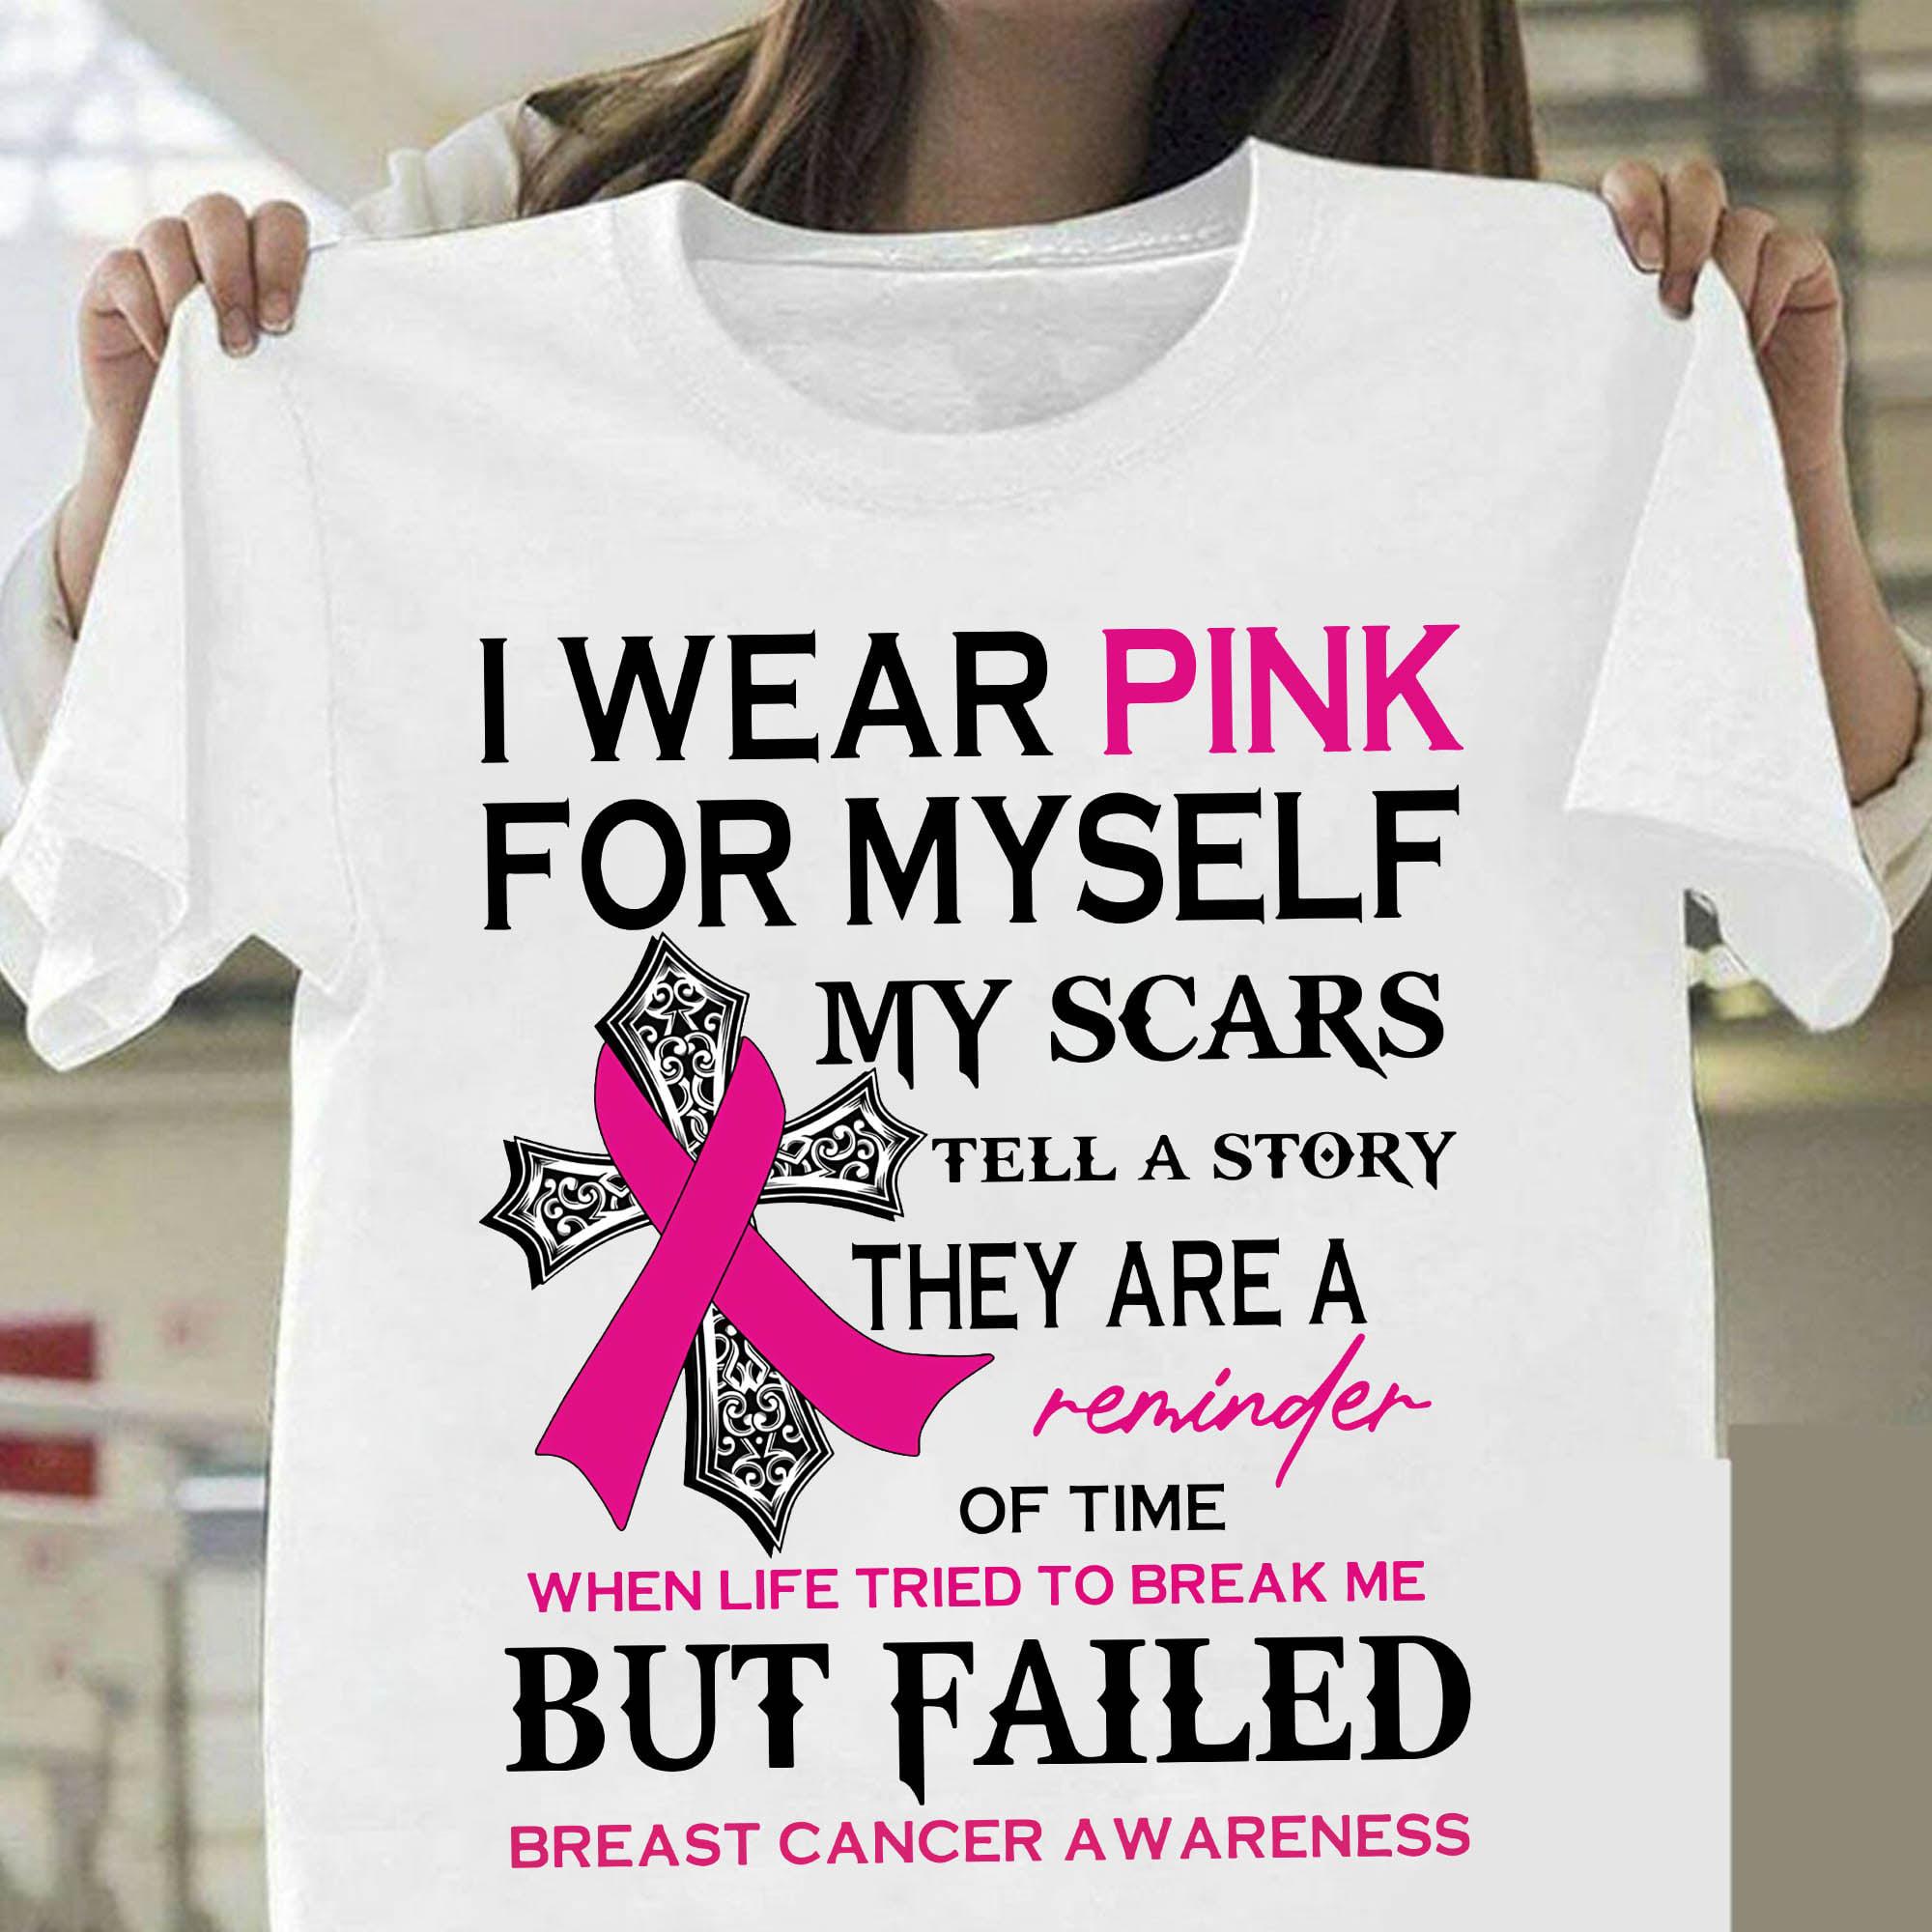 I wear pink for myself, my scars tell a story they are a reminder of time when life tried to break me - Breast cancer awareness